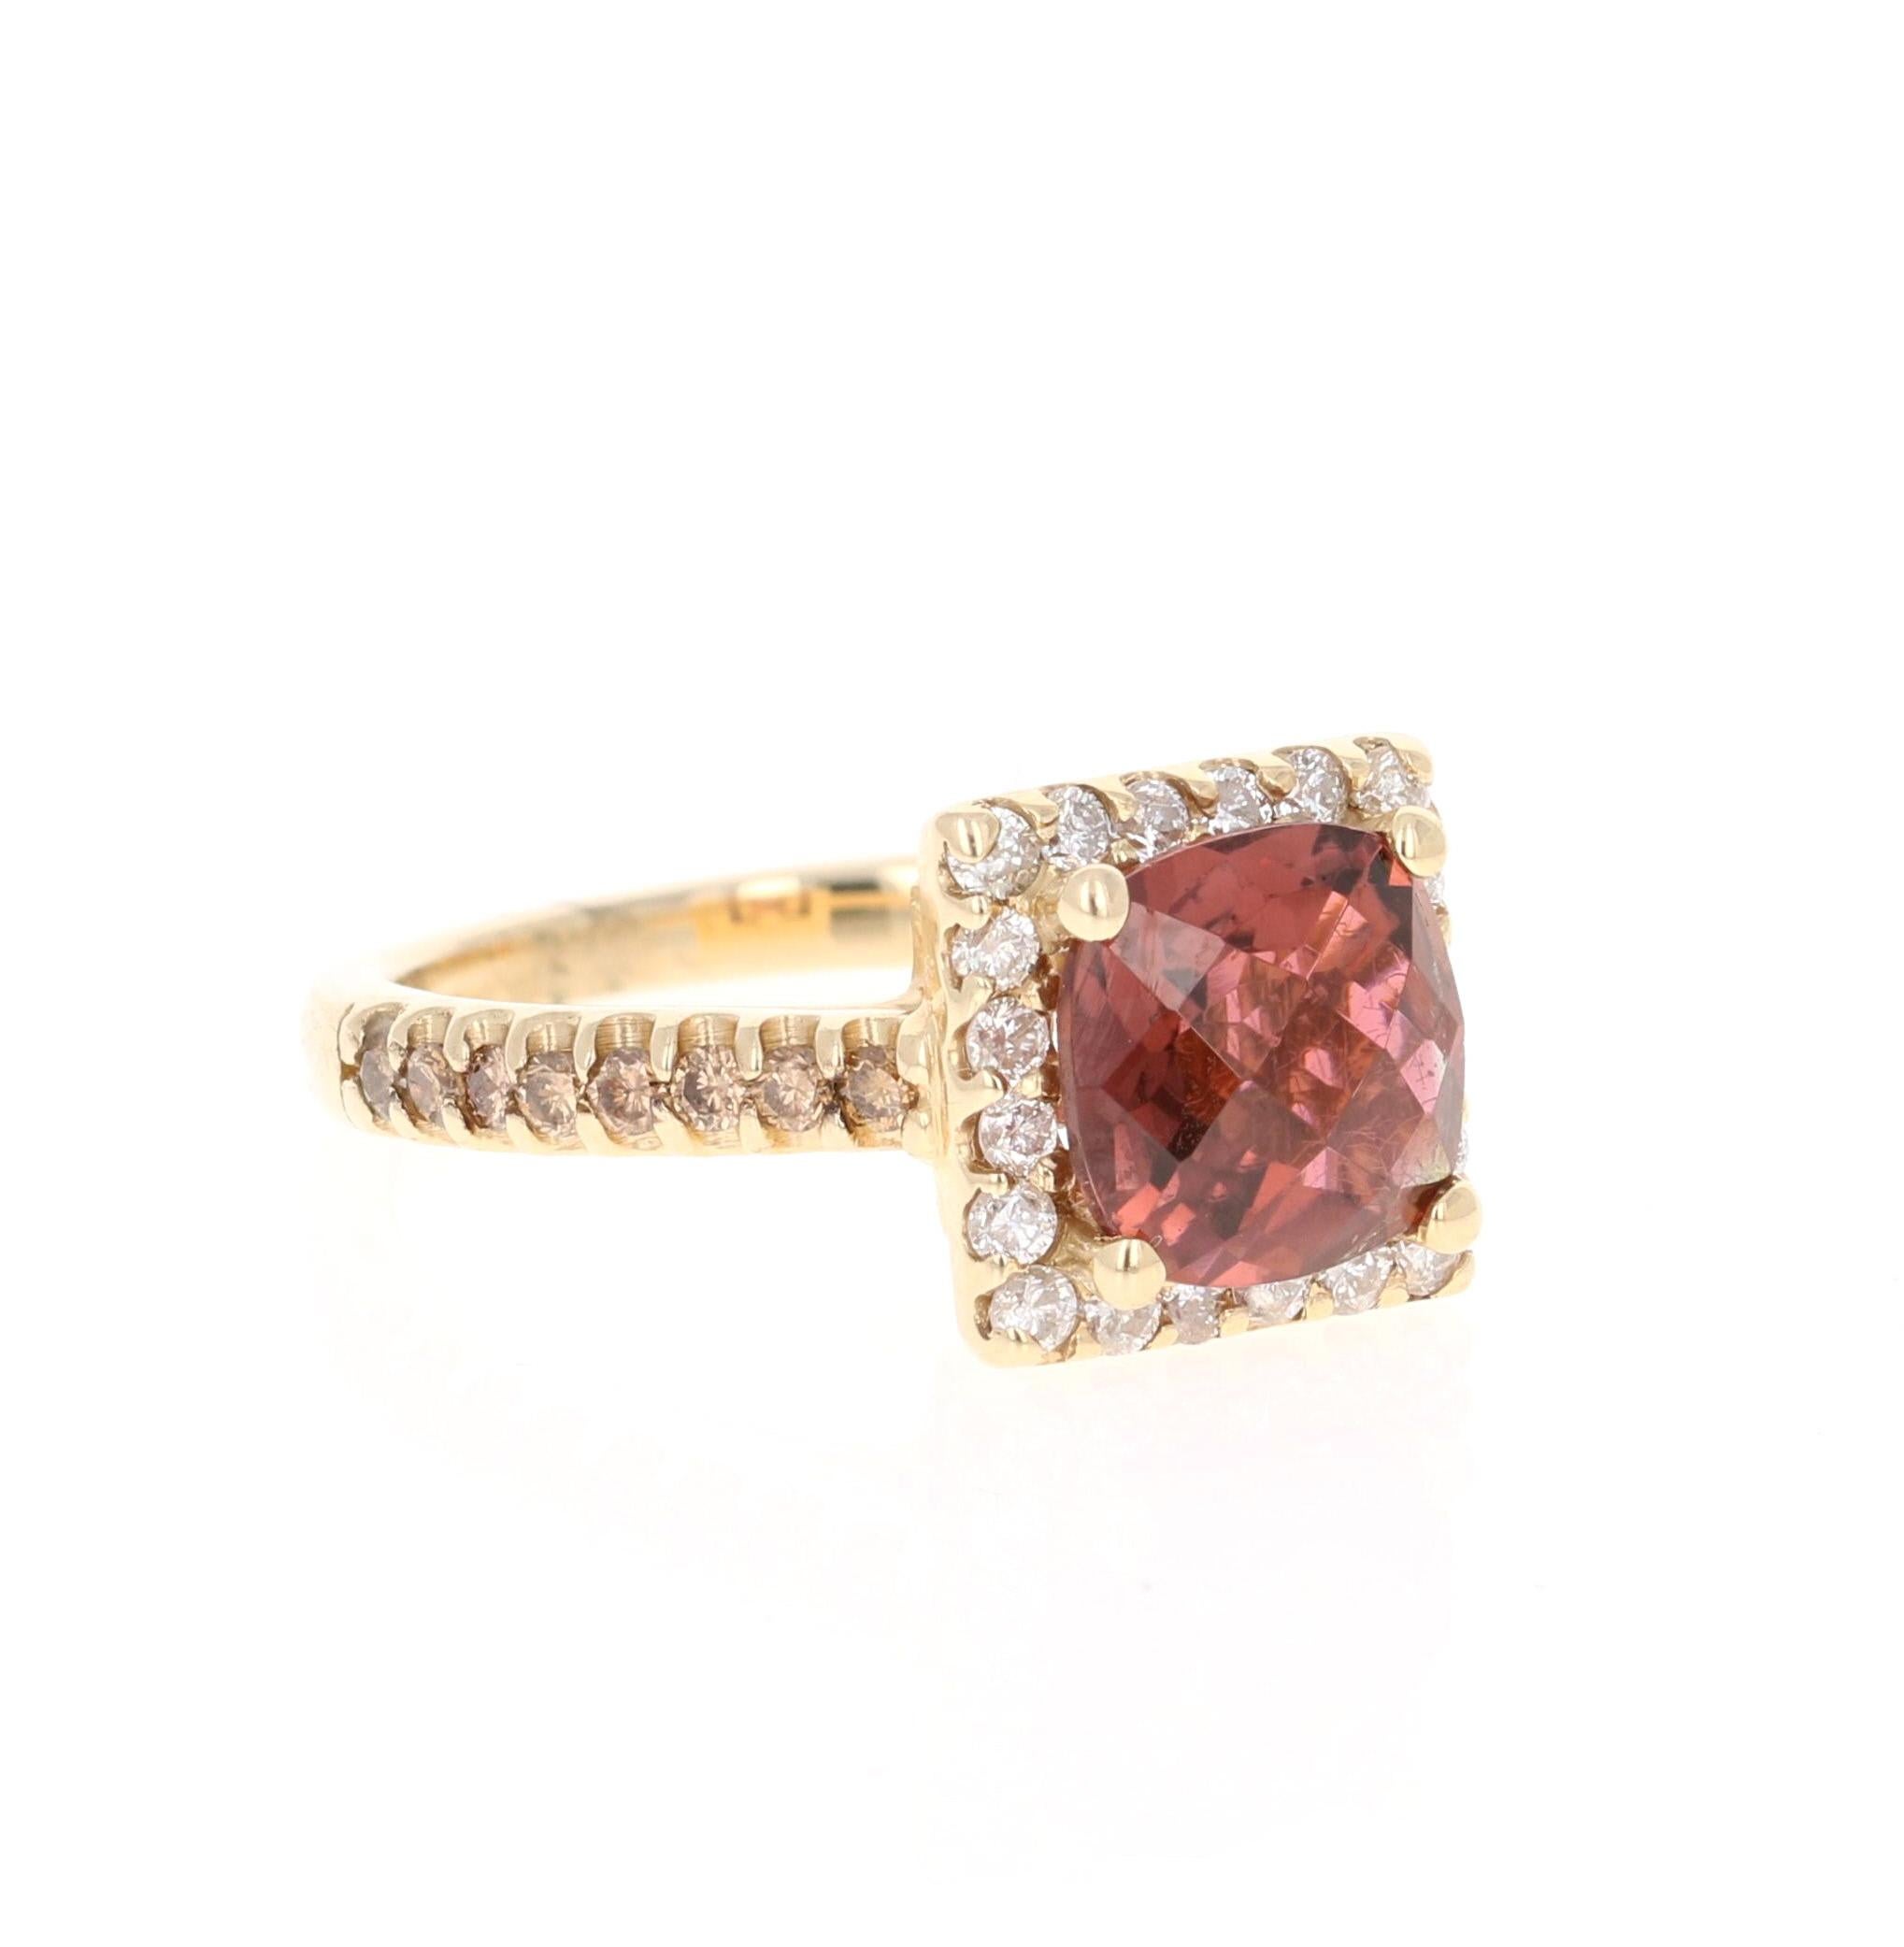 This ring has a pretty Mauve-Brownish Cushion Cut Pink Tourmaline that weighs 2.23 Carats. Floating around the tourmaline are 20 Round Cut Diamonds that weigh 0.39 Carats. The shank of the ring has 16 Champagne Colored Natural Diamonds that weigh